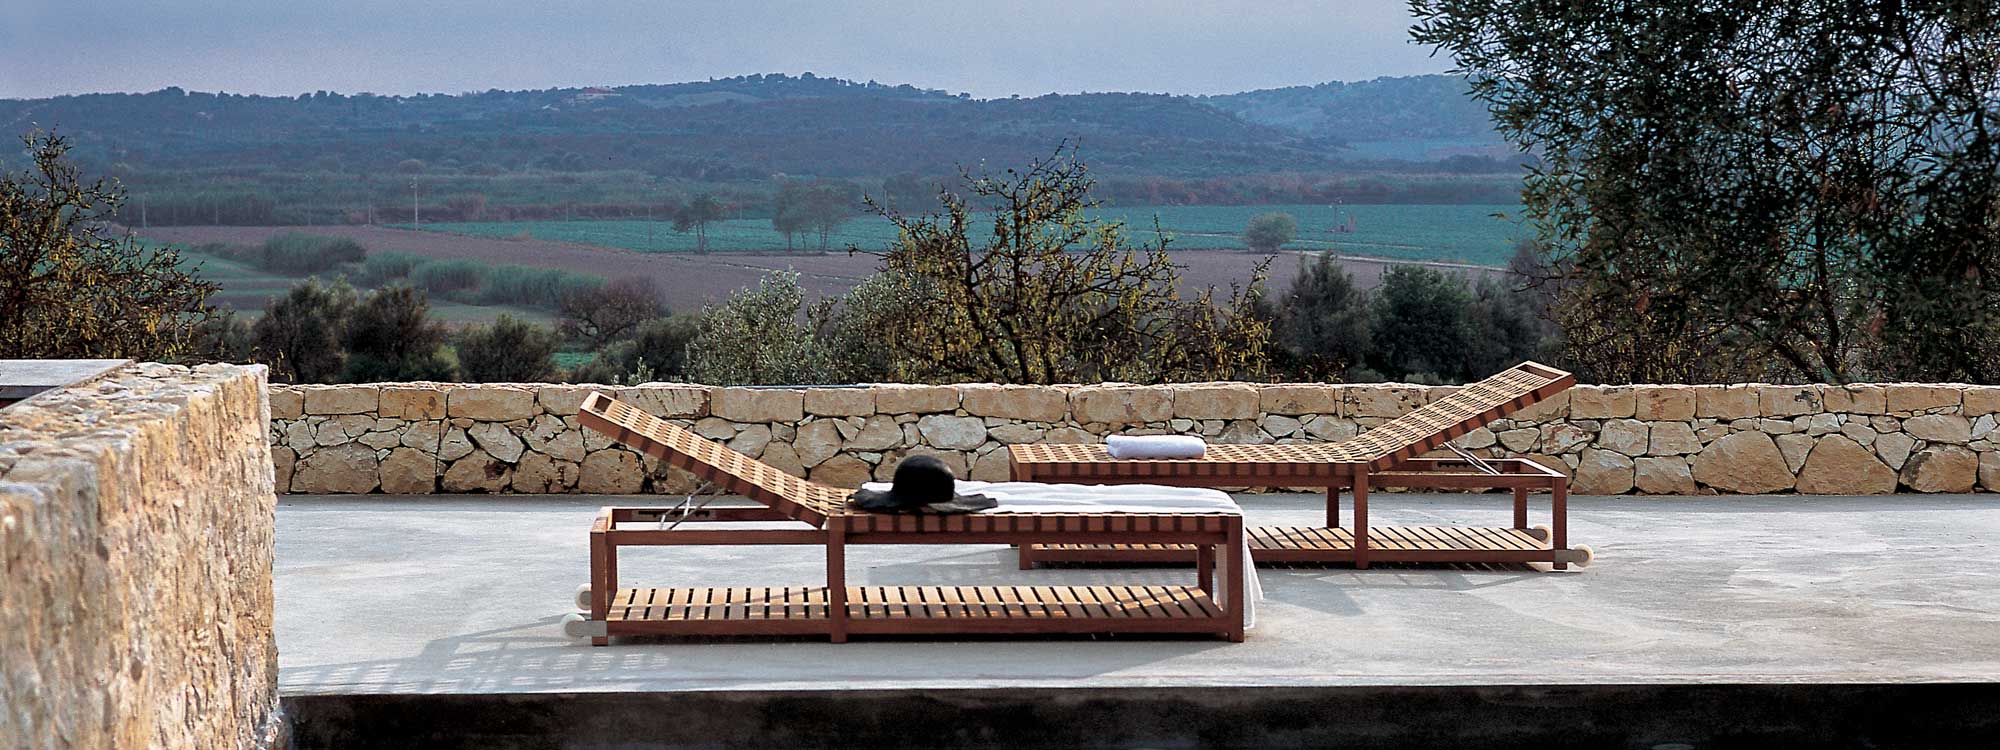 Pair of Network modern teak sunbeds on poolside with Italian countryside in background